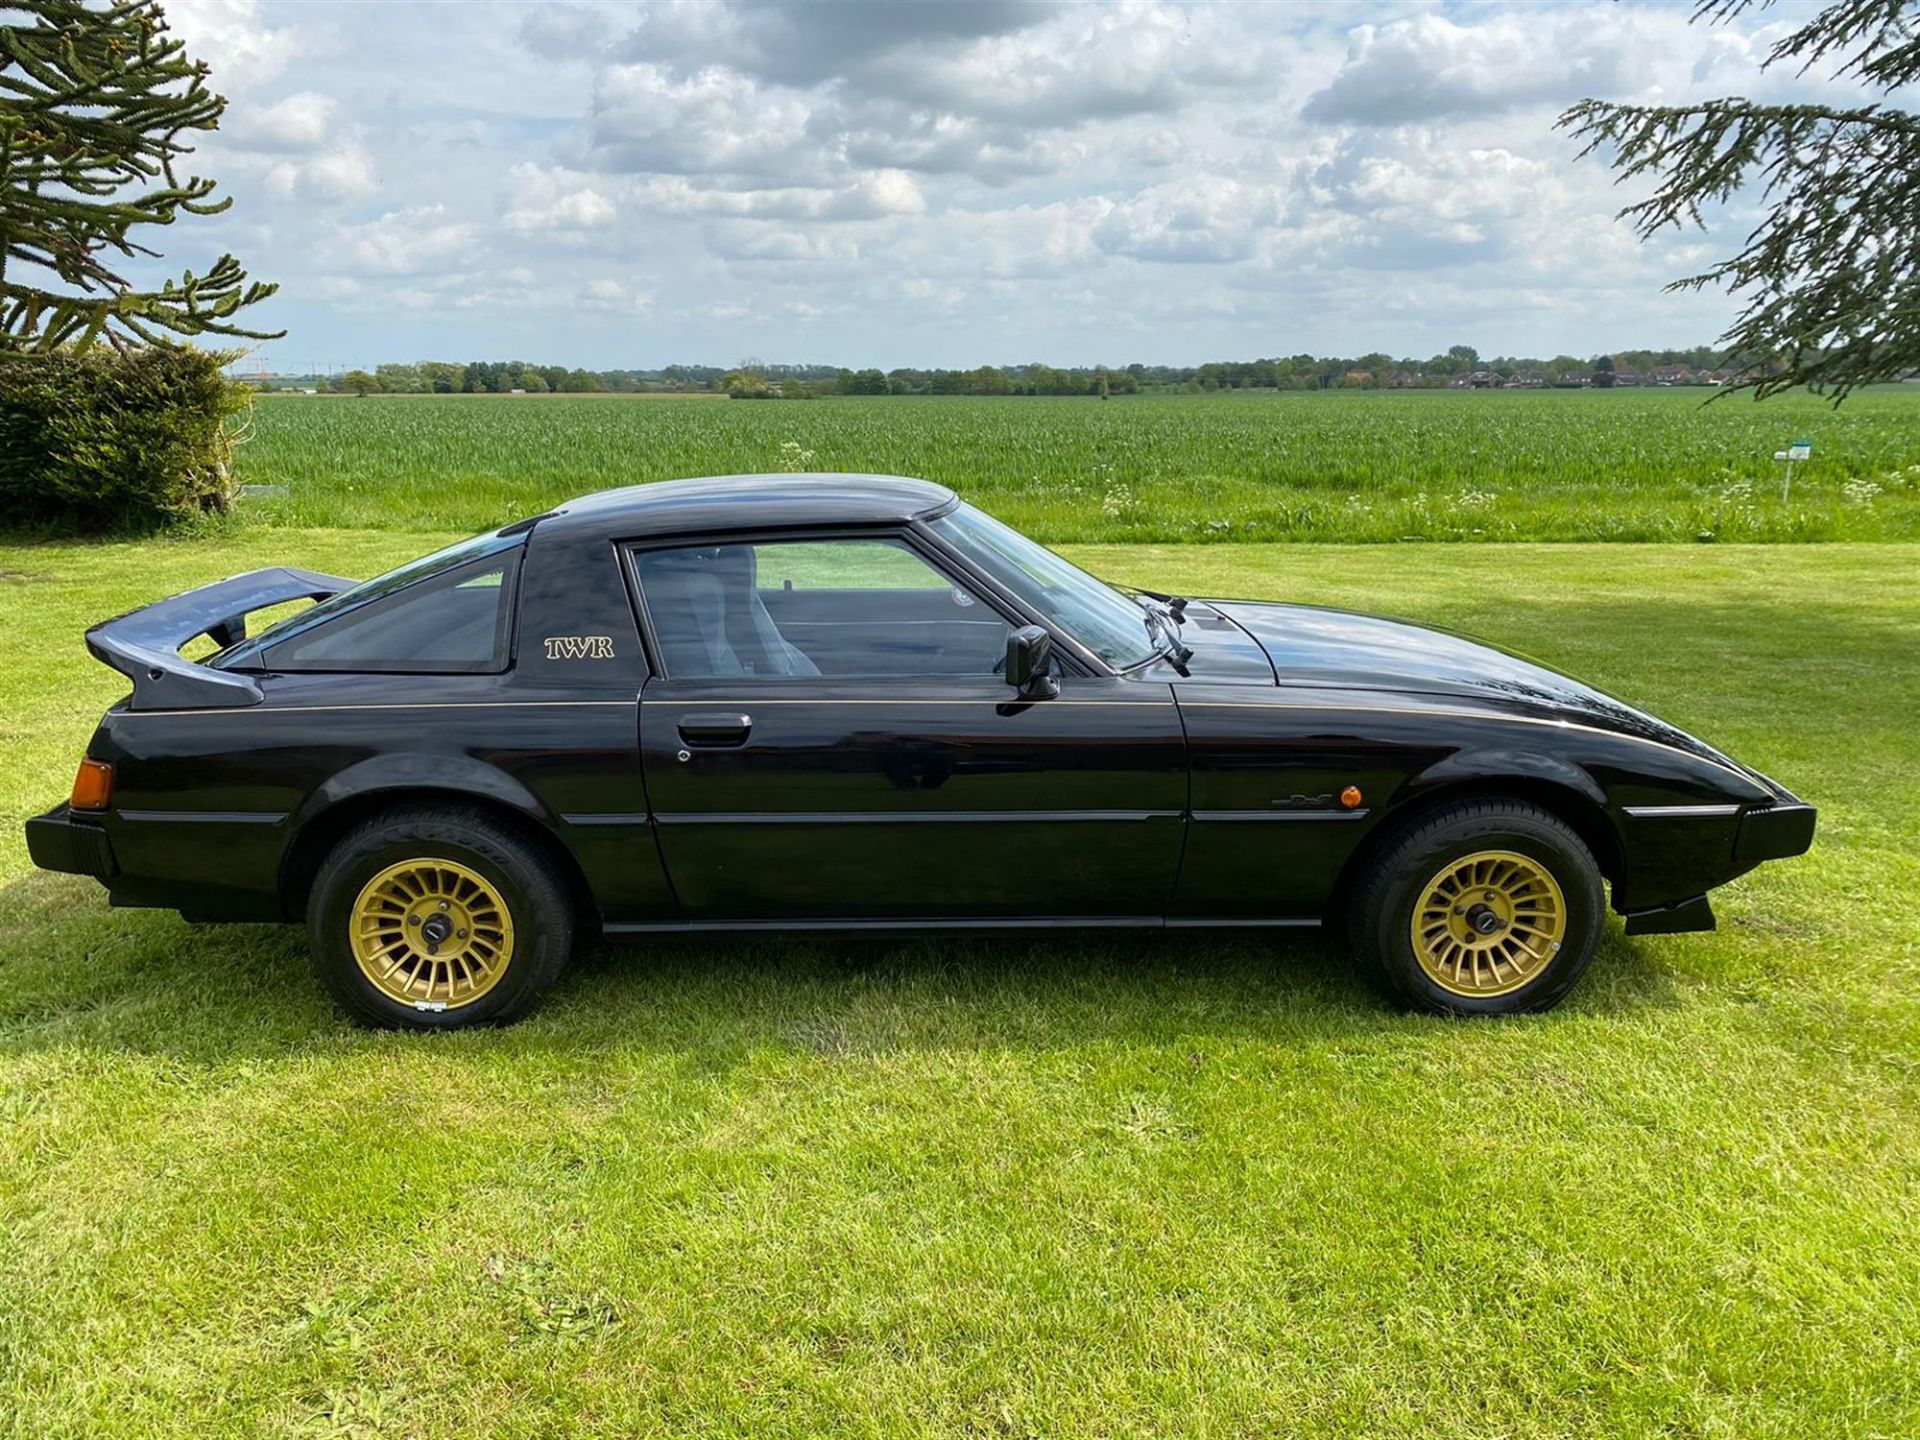 1980 Mazda RX-7 Series 1 (TWR) - Image 10 of 10